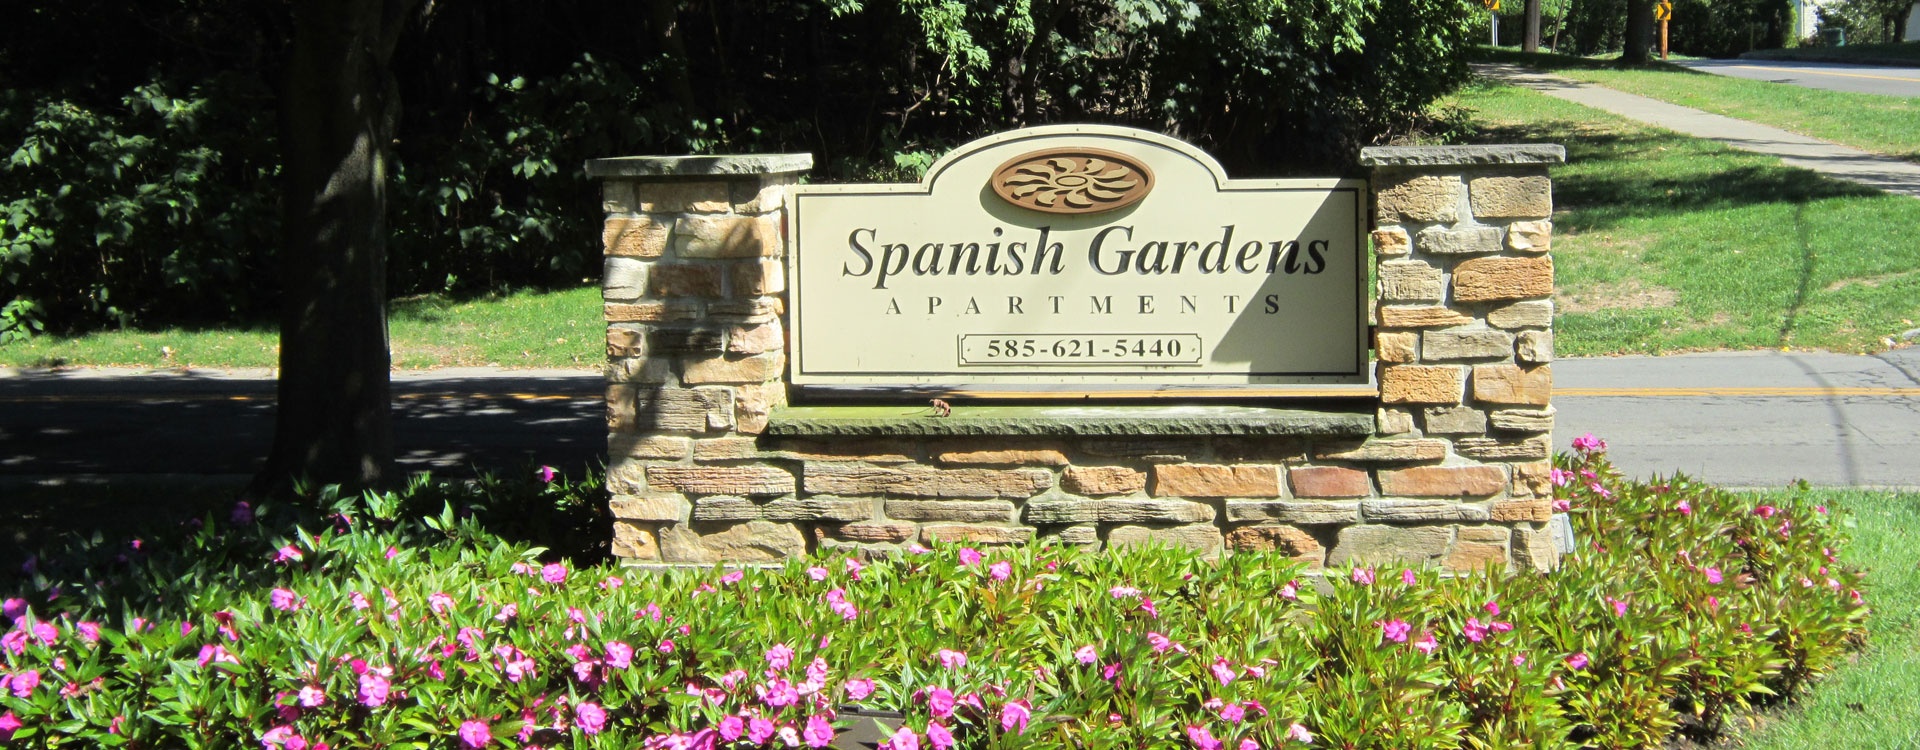 Spanish Gardens Apartments Apartments In Greece Ny Renters